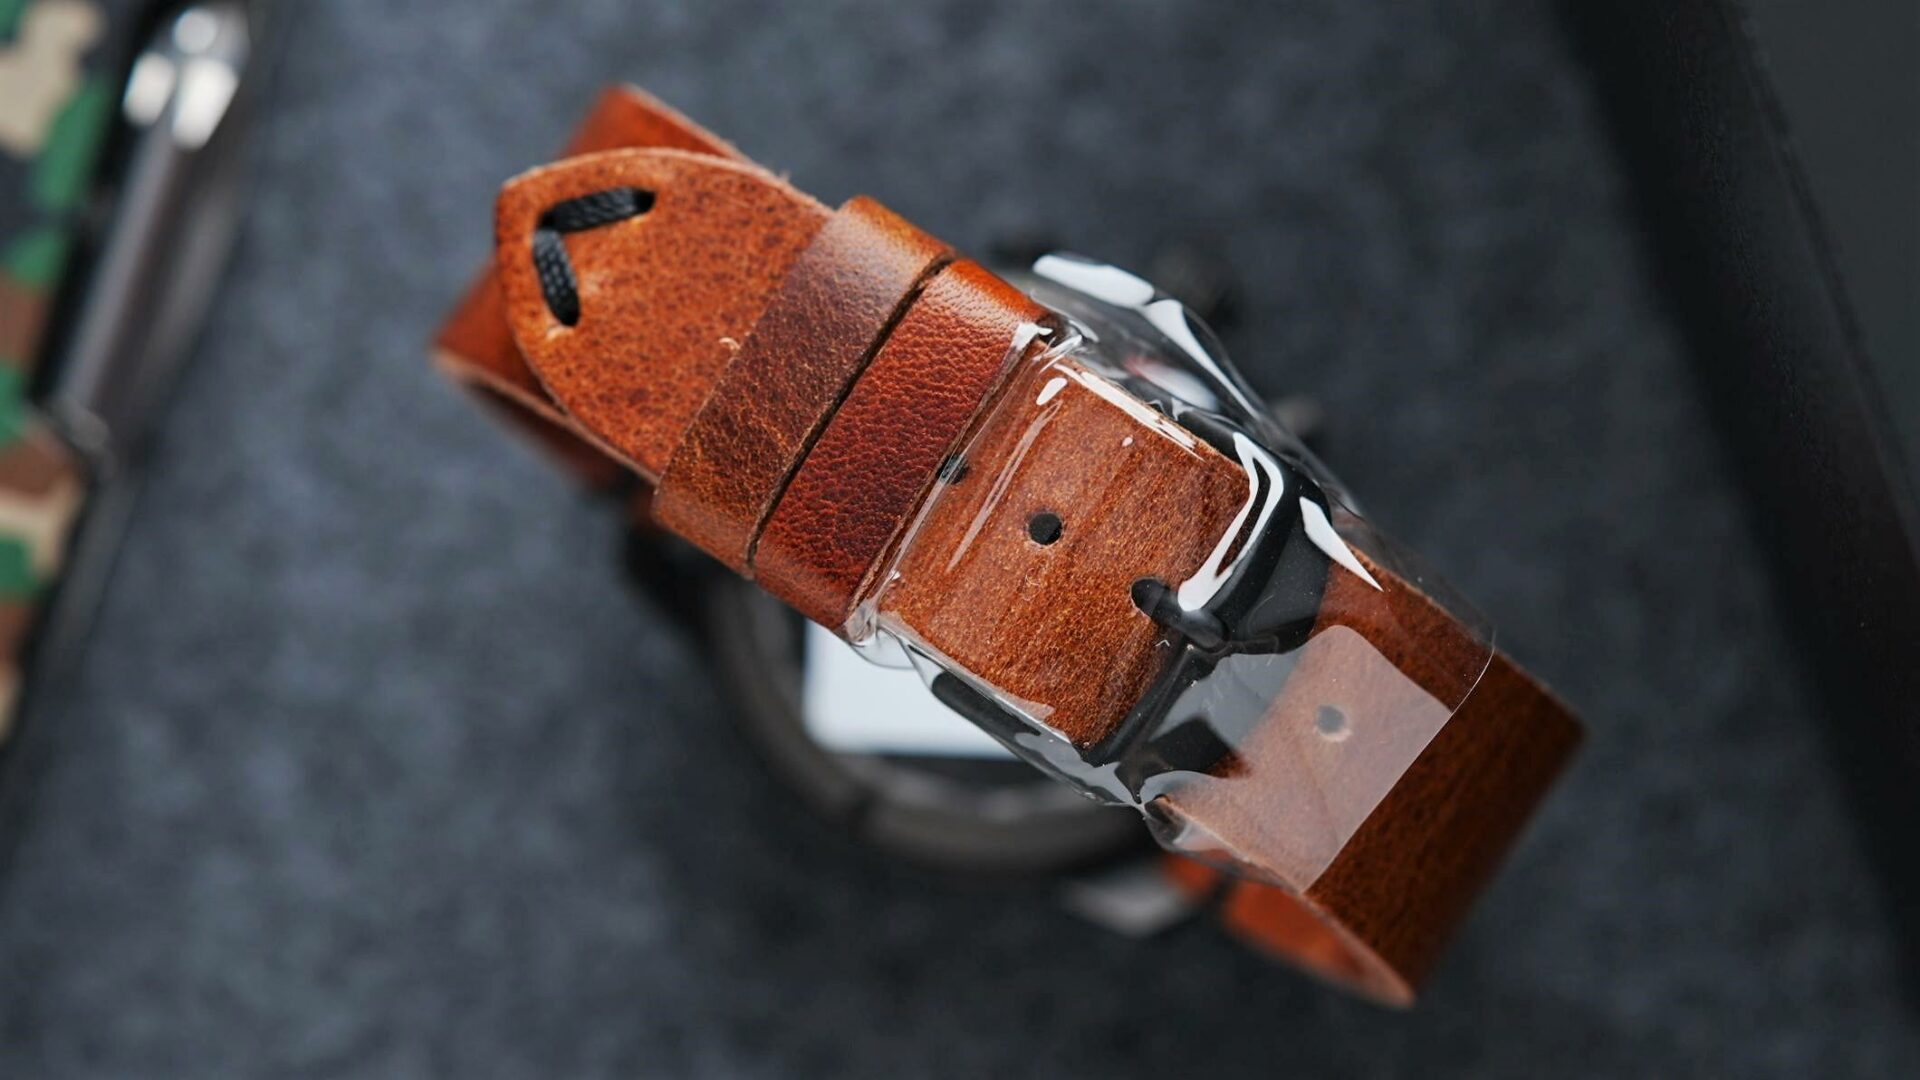 Sinn EZM 1.1S Limited Edition 500 strap and buckle new encased in plastic.